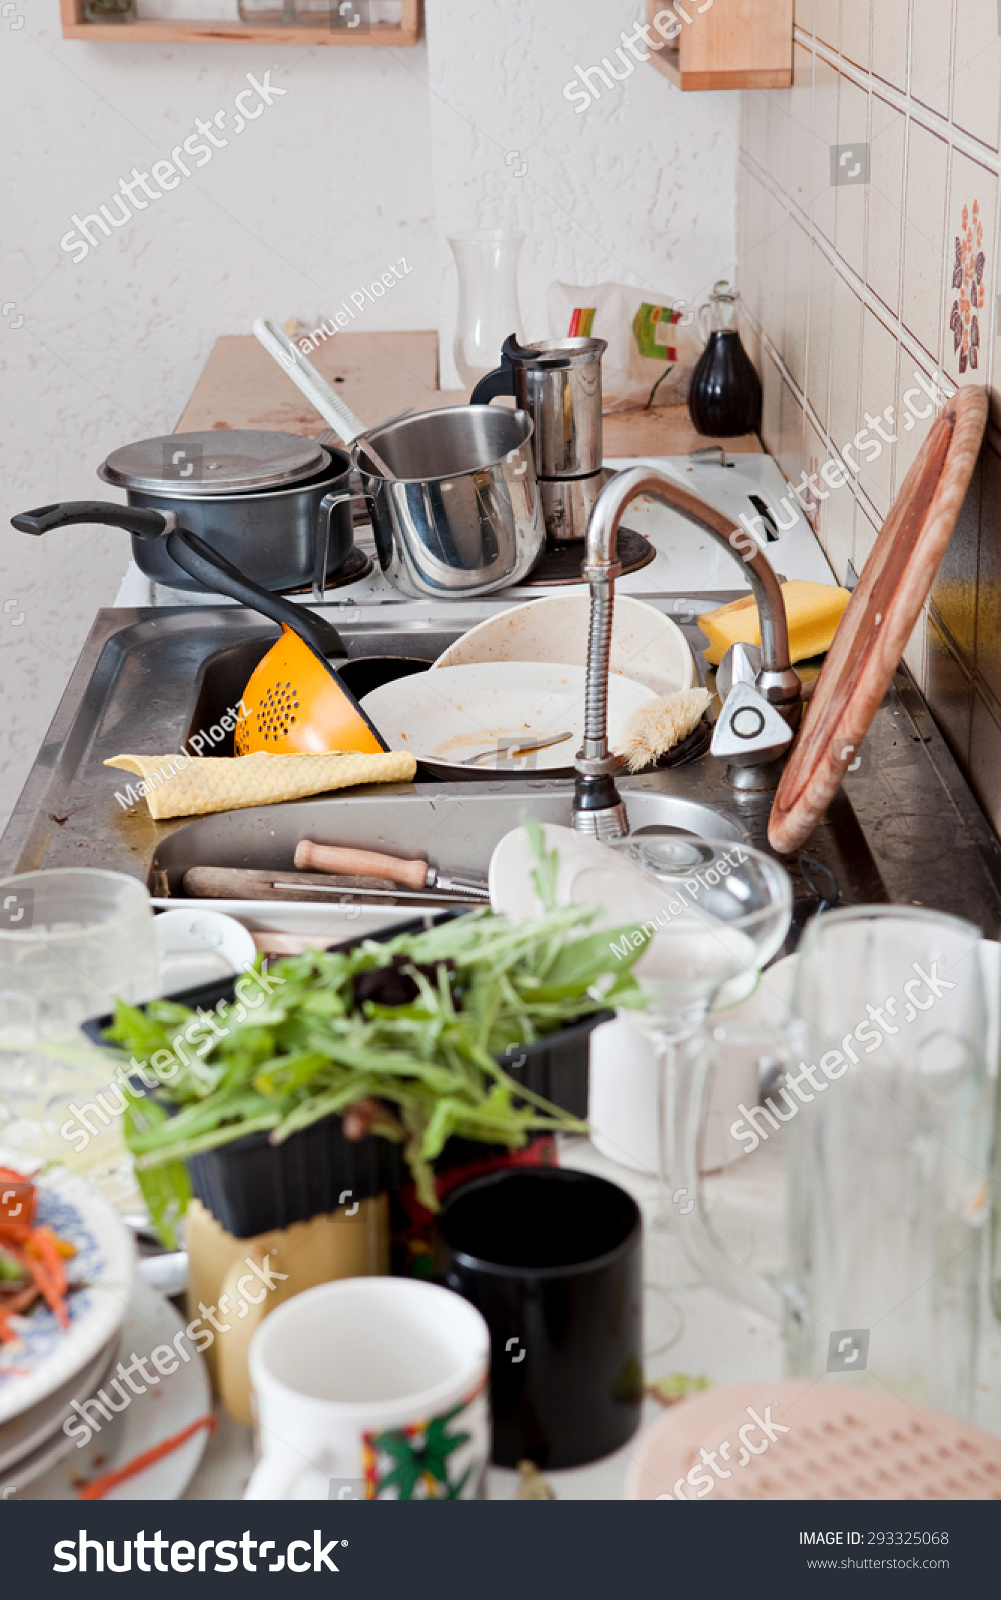 Dirty Kitchen Messy Crockery Leftovers Filthy Stock Photo 293325068 ...